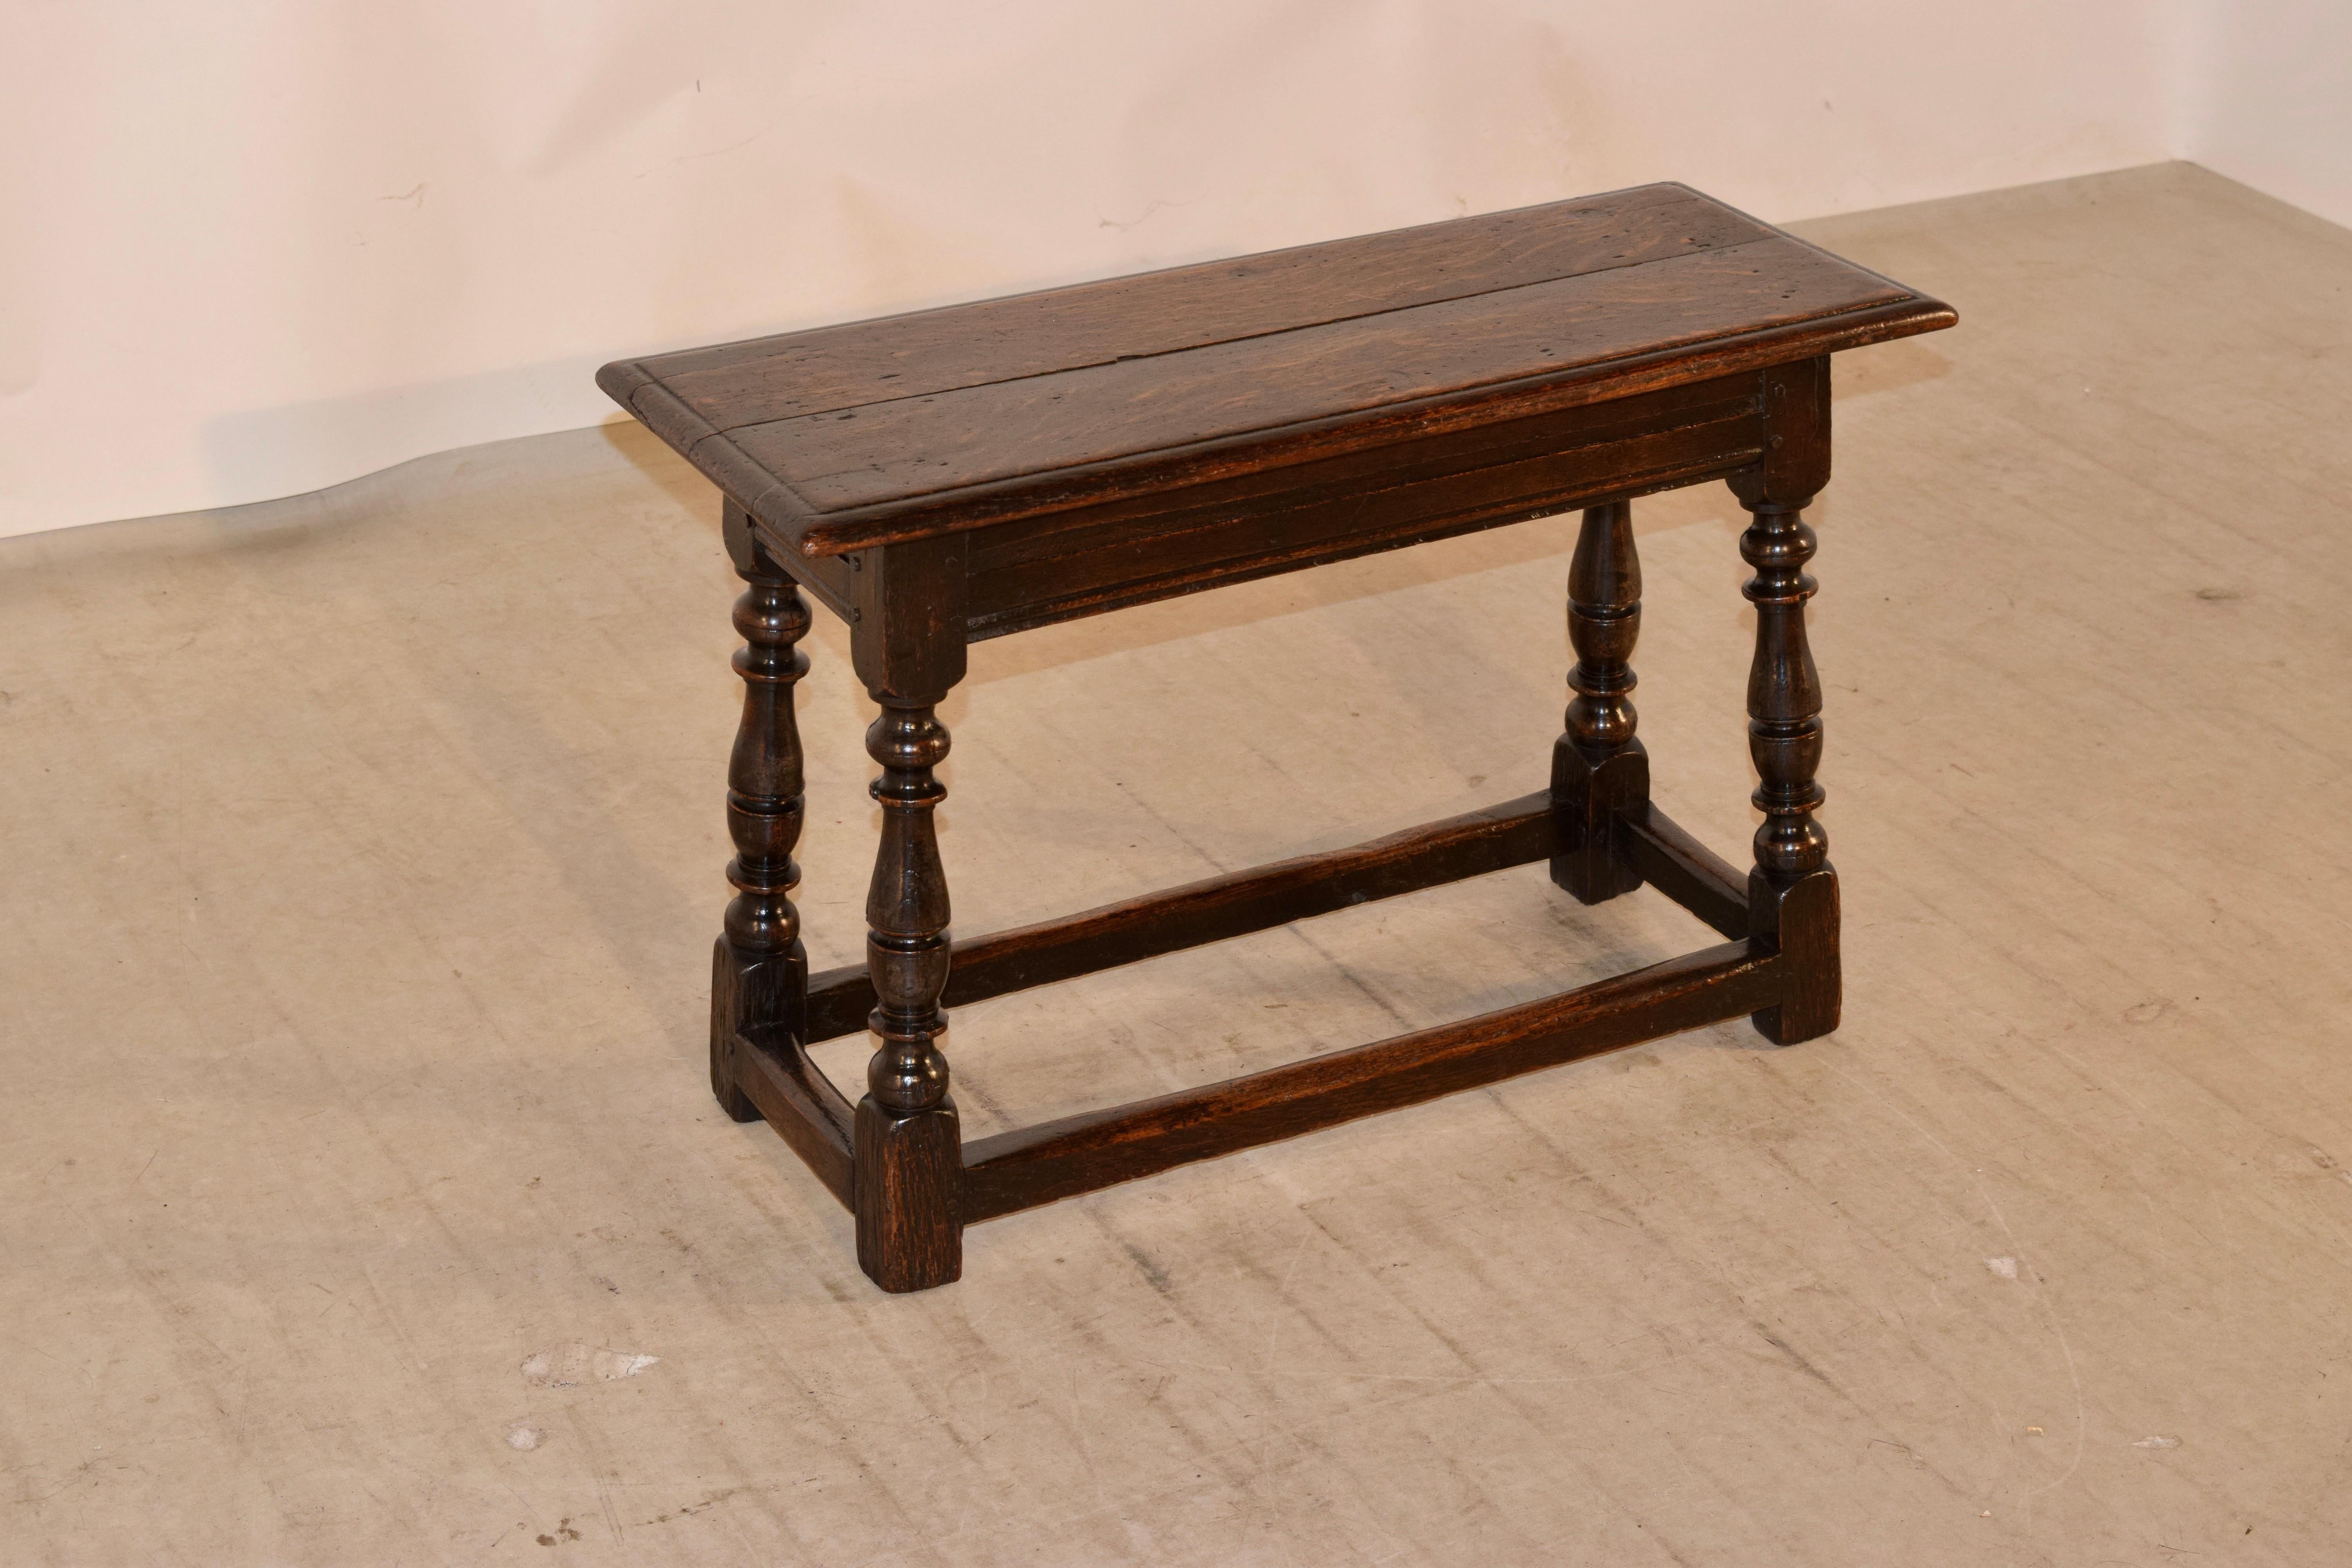 19th century oak joint bench from England with a two plank top which has a beveled edge and follows down to a simple apron with routed decoration. The piece is supported on hand-turned and splayed legs joined by simple stretchers.